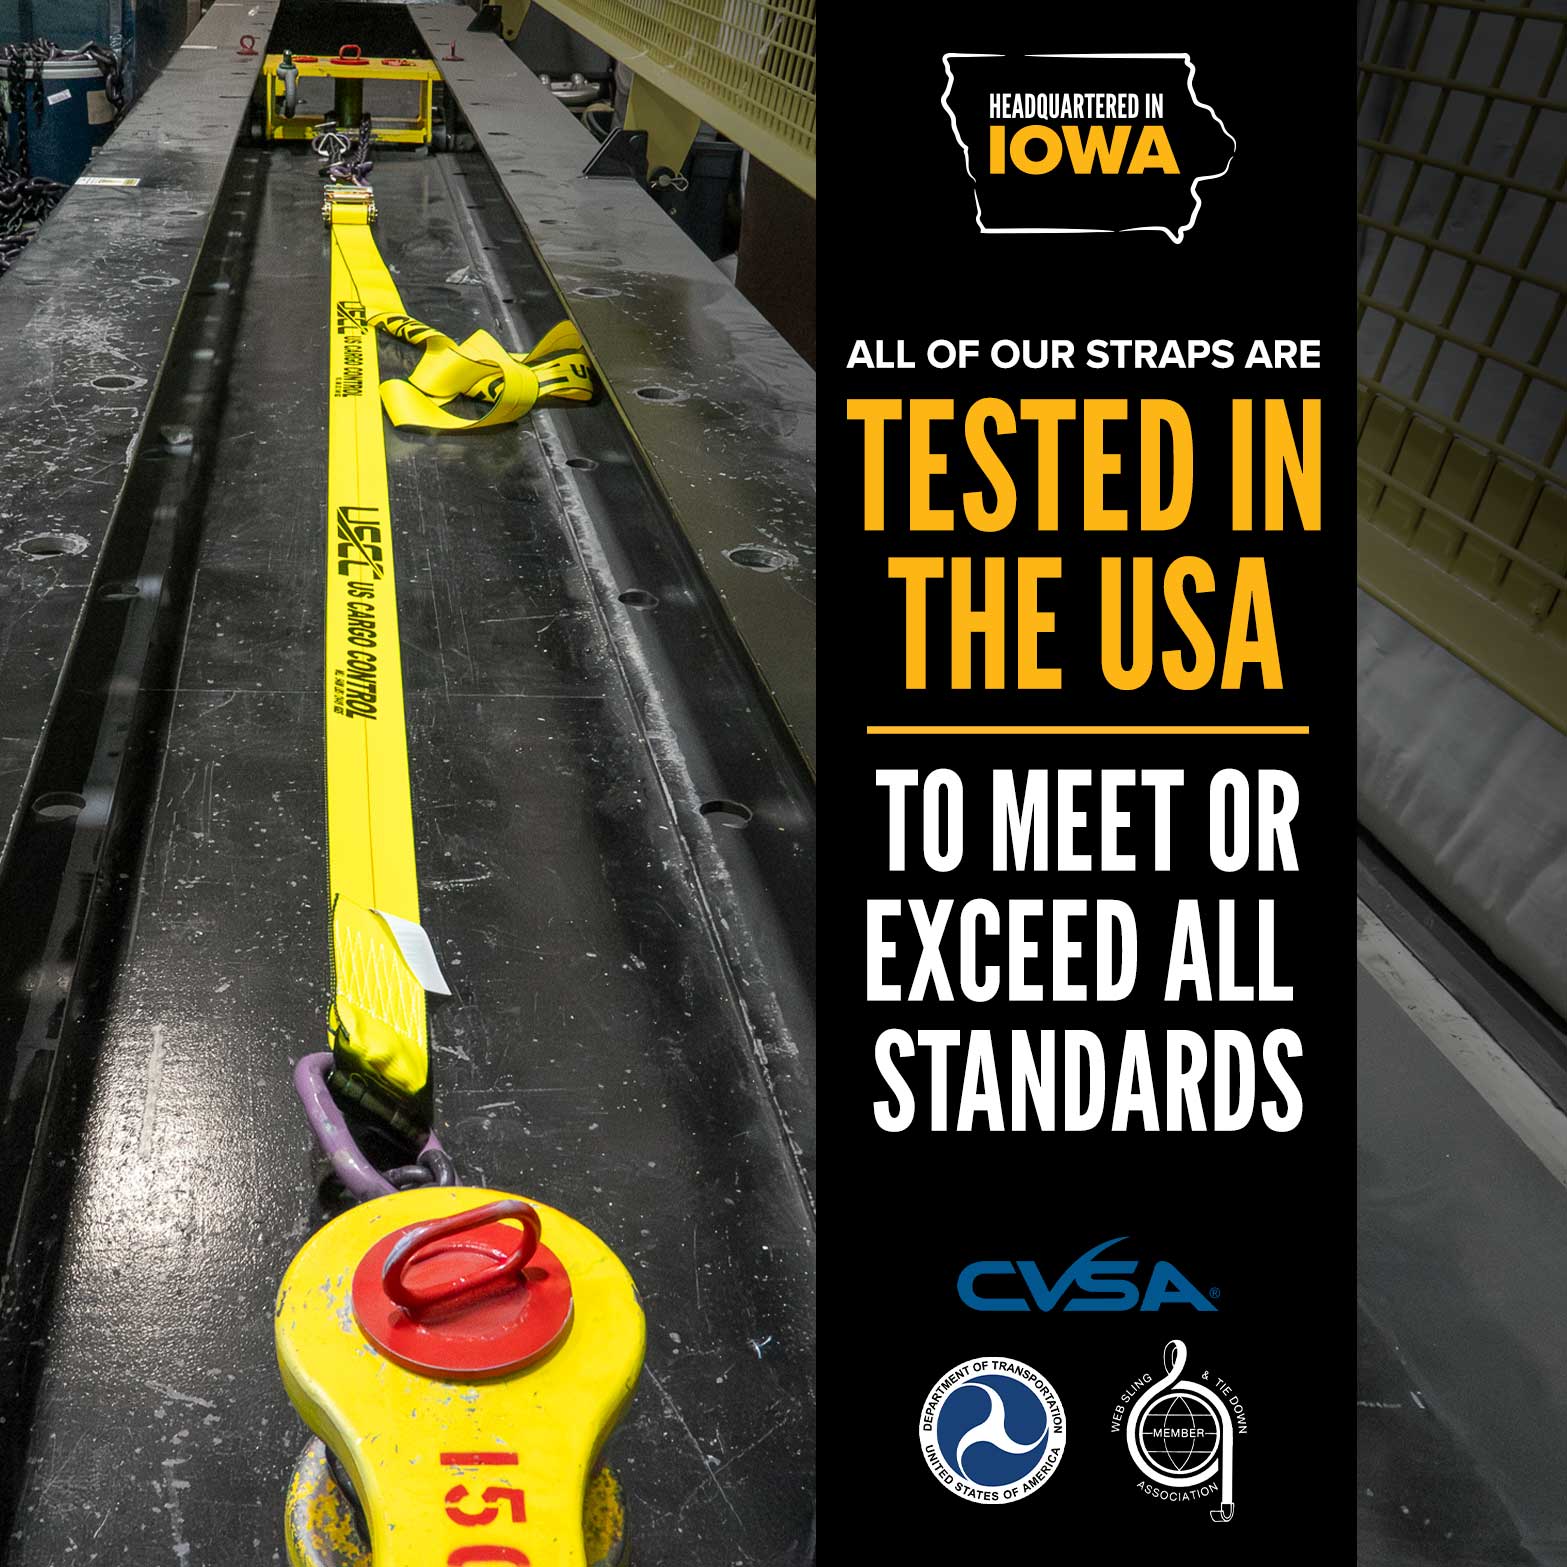 27' heavy duty winch straps tested in the USA